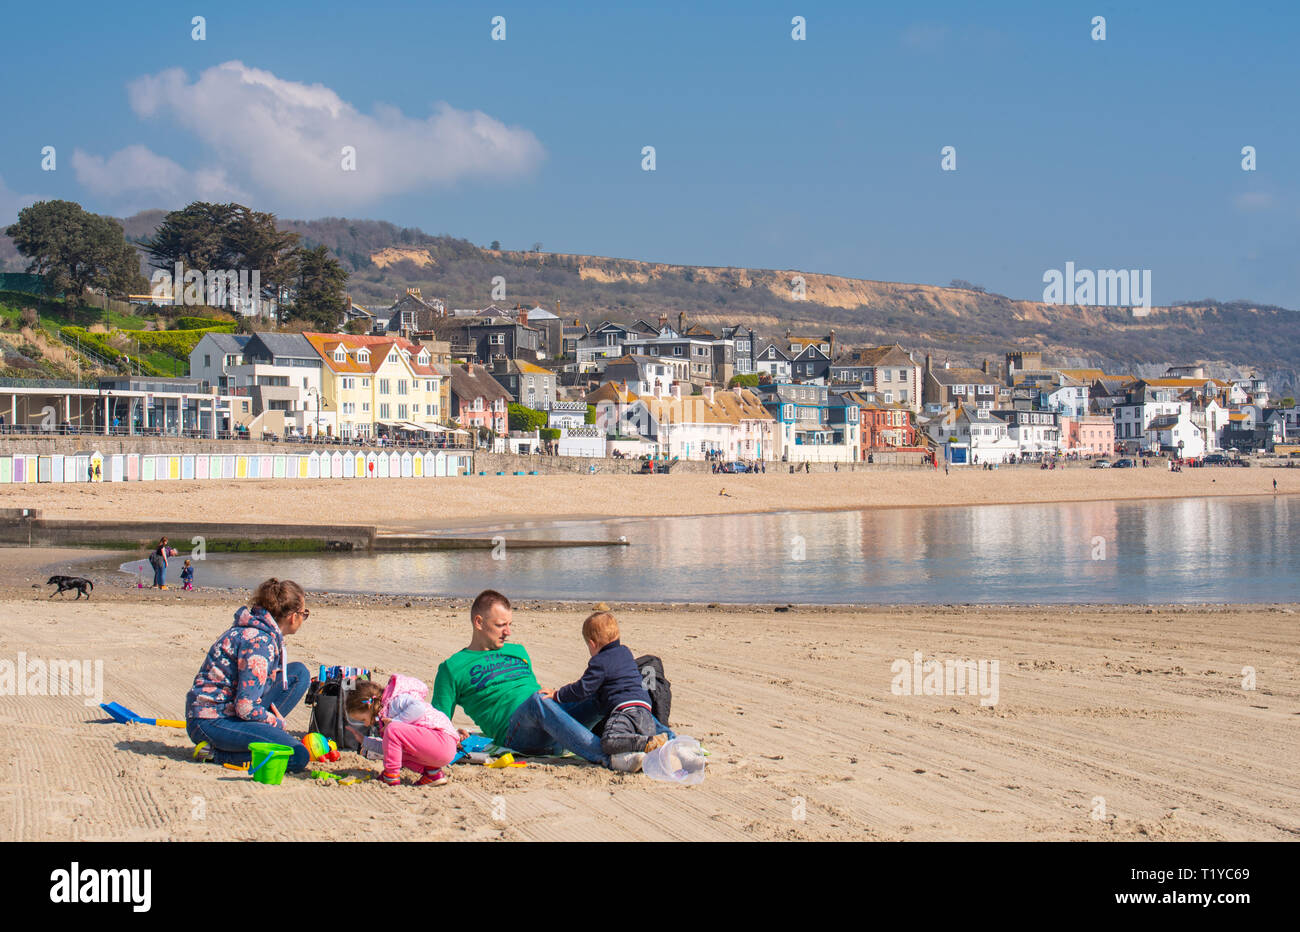 Lyme Regis, Dorset, UK. 29th March 2019. UK Weather: Another day of glorious sunshine and bright blue skies as the seaside resort town of Lyme Regis as the early spring heatwave continues.  Visitors and families enjoy the unseasonably hot weather on the sandy beach. Credit: Celia McMahon/Alamy Live News Stock Photo